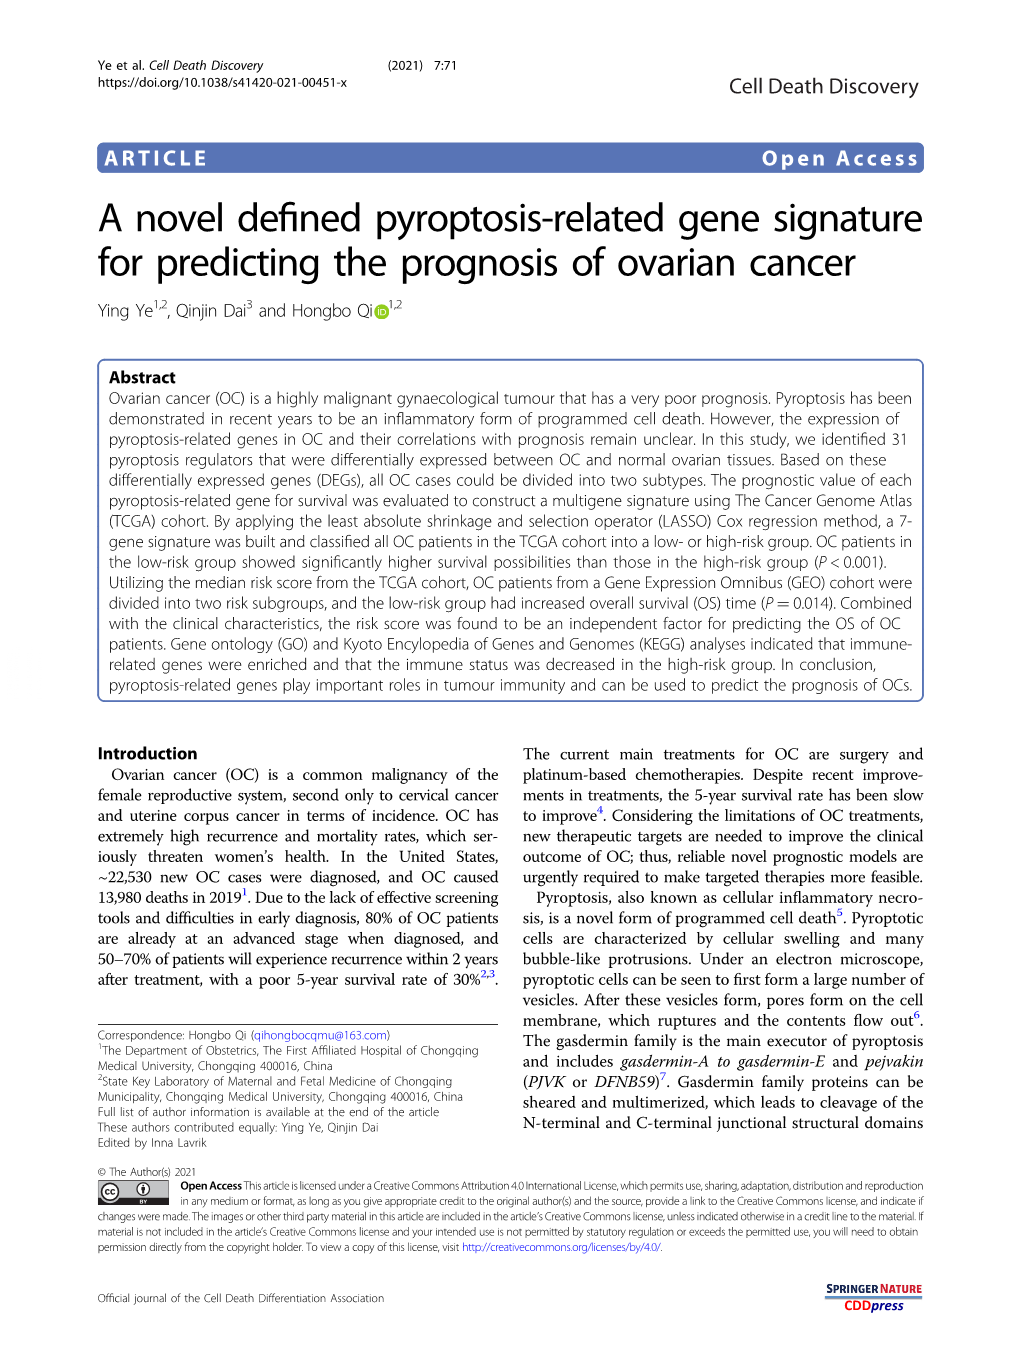 A Novel Defined Pyroptosis-Related Gene Signature for Predicting The